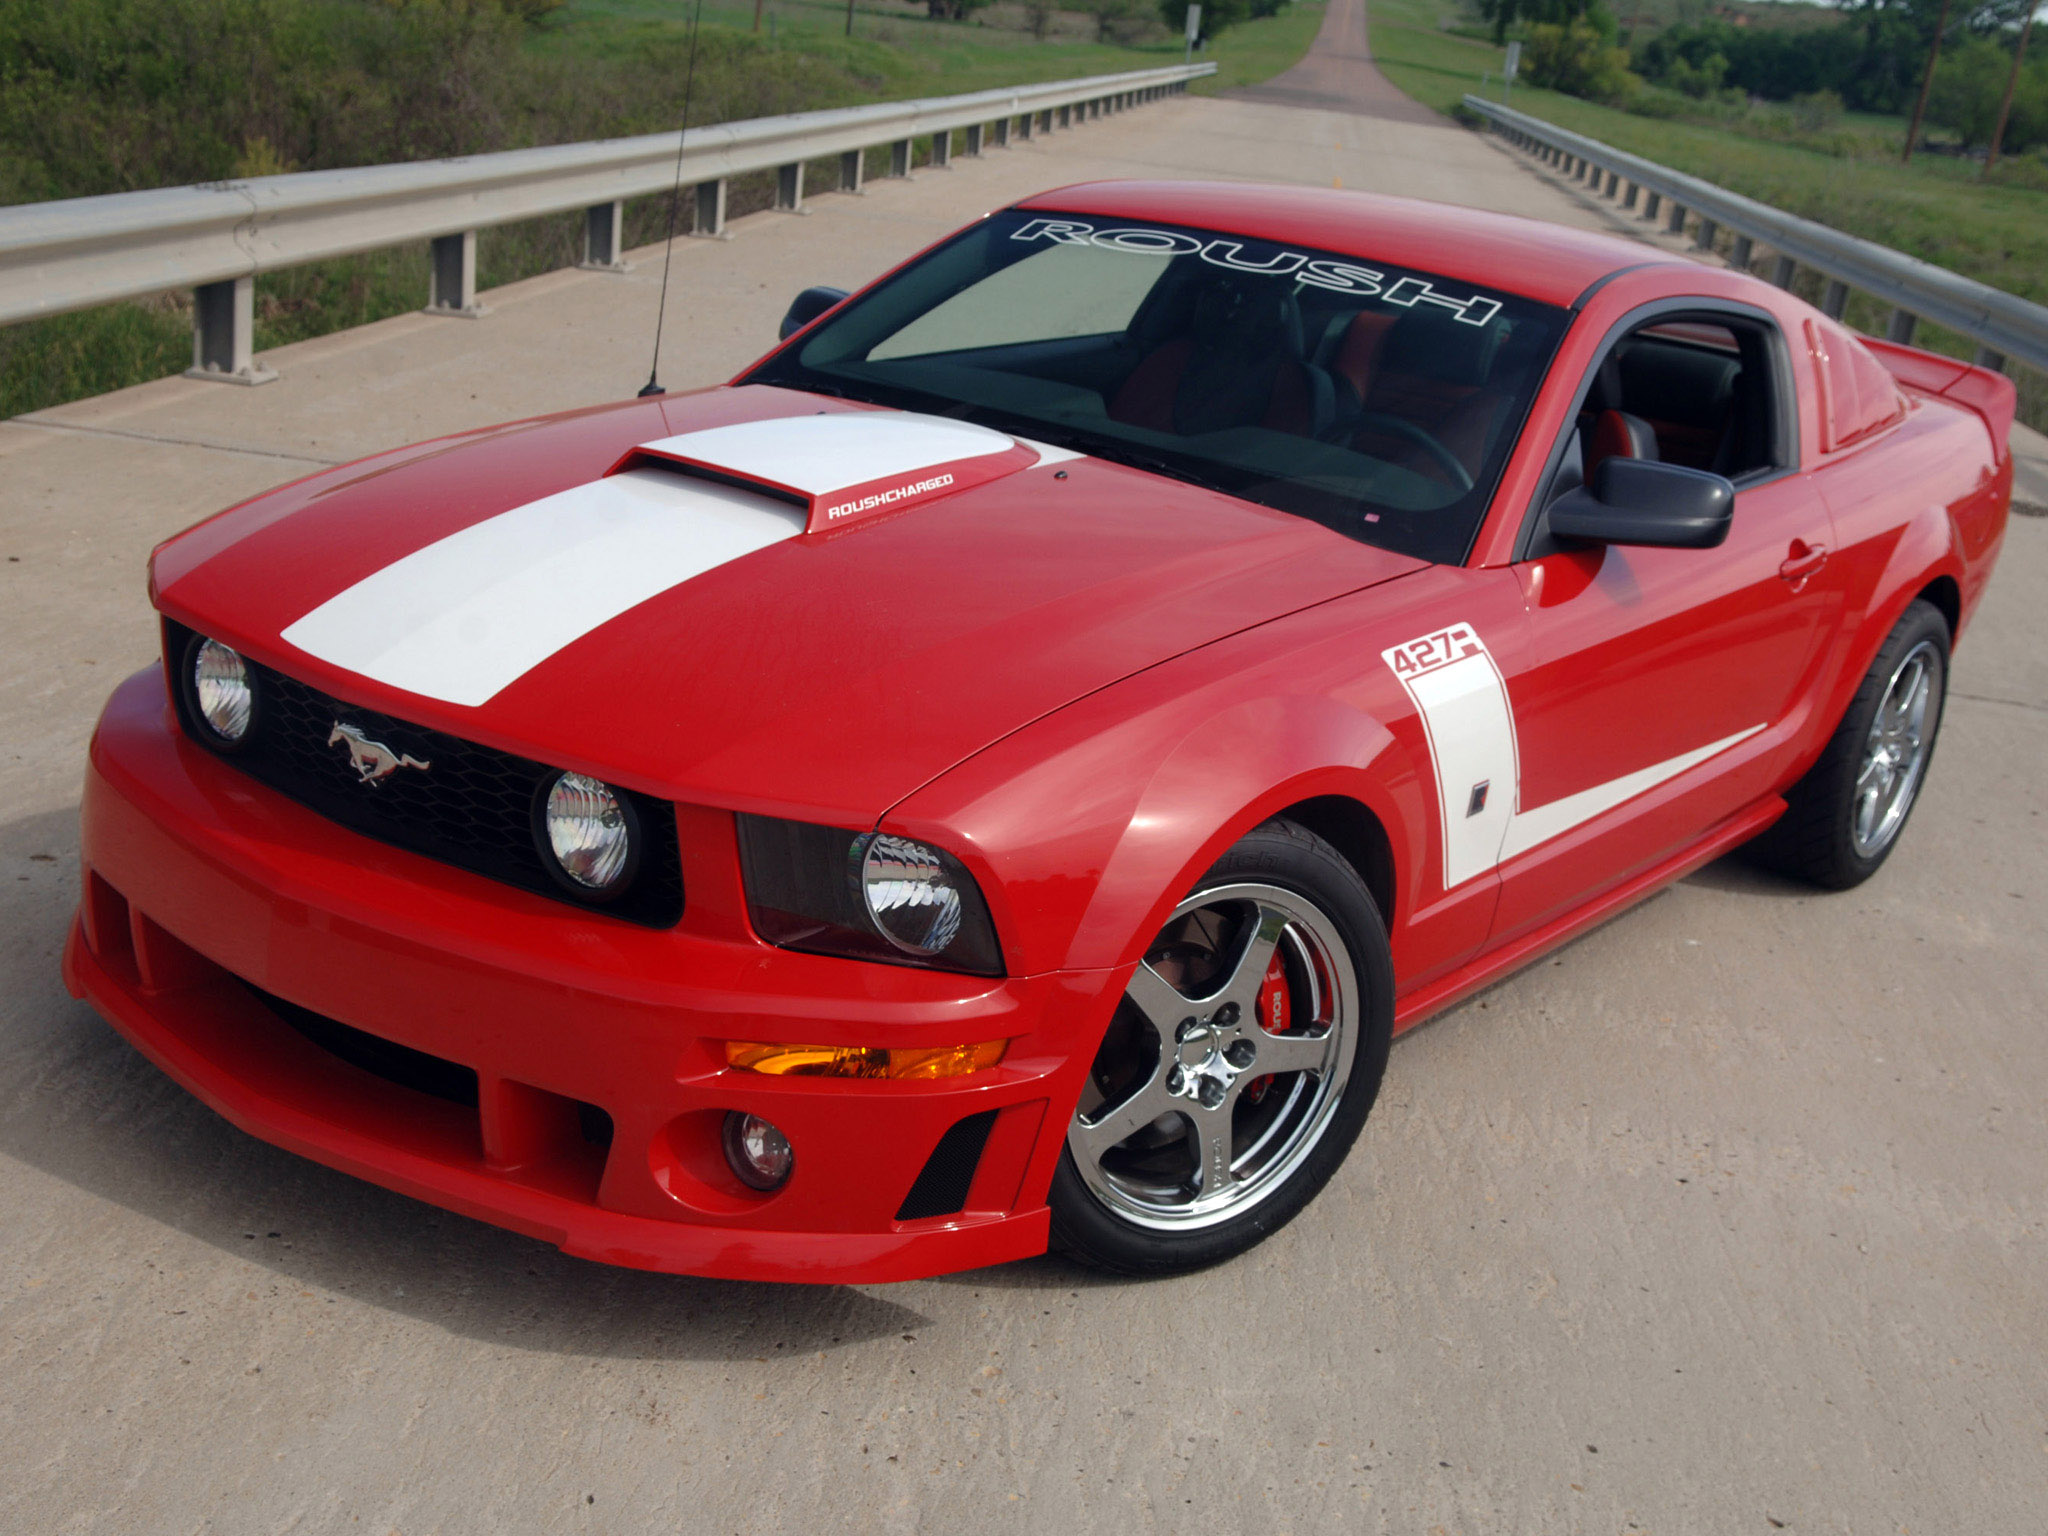 2009, Roush, Ford, Mustang, 427r, Muscle, Tuning Wallpaper